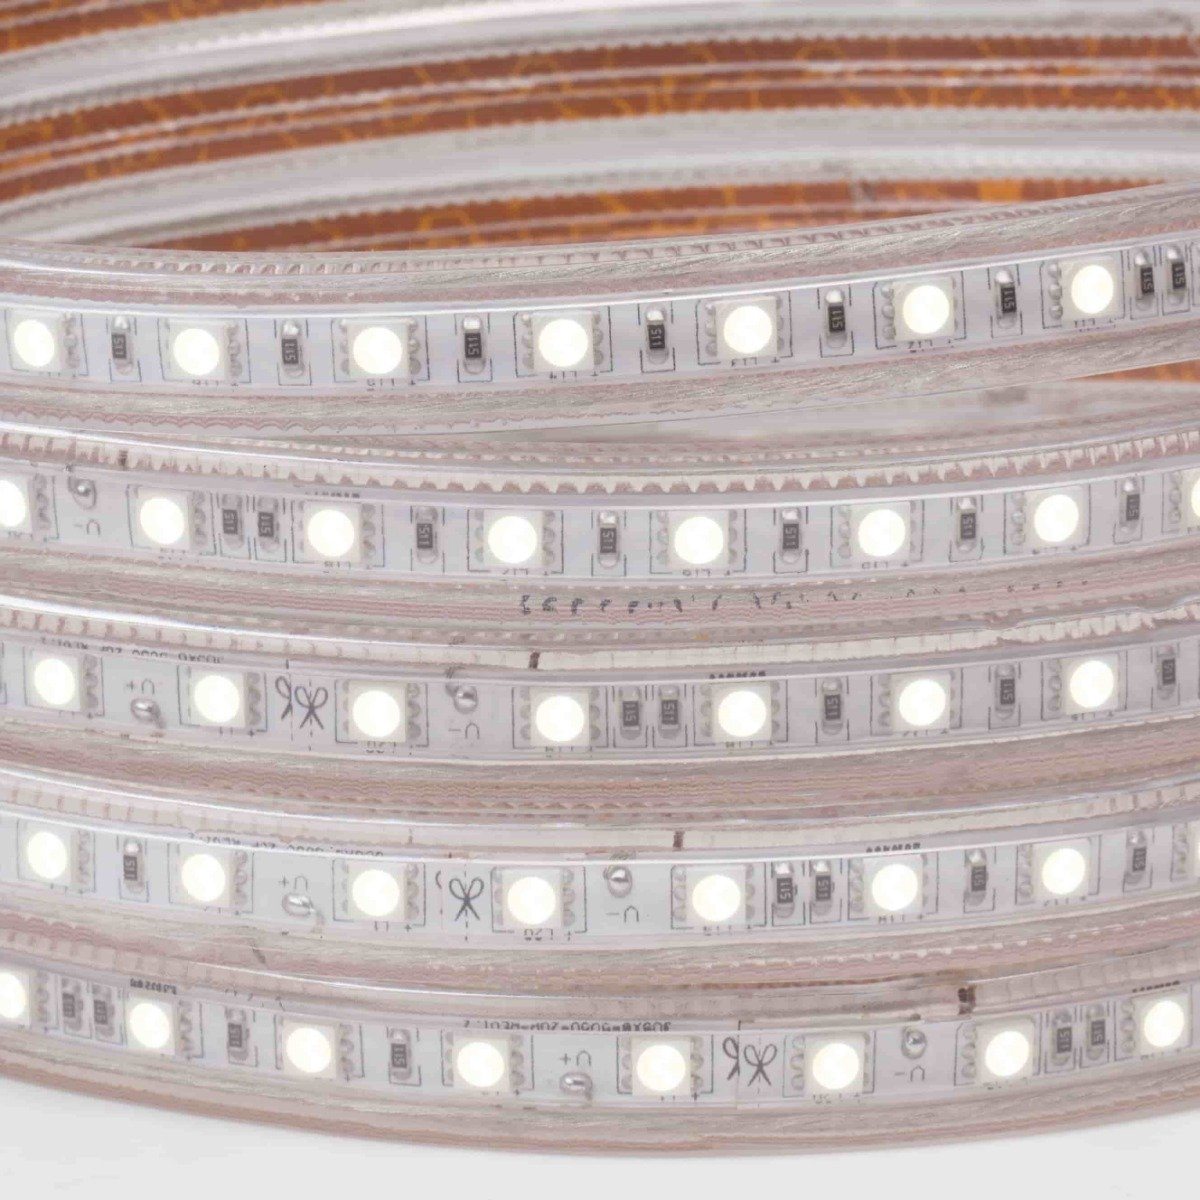 120V led strip lights on white background coiled five times with illuminated white color led chips and cap seal at end